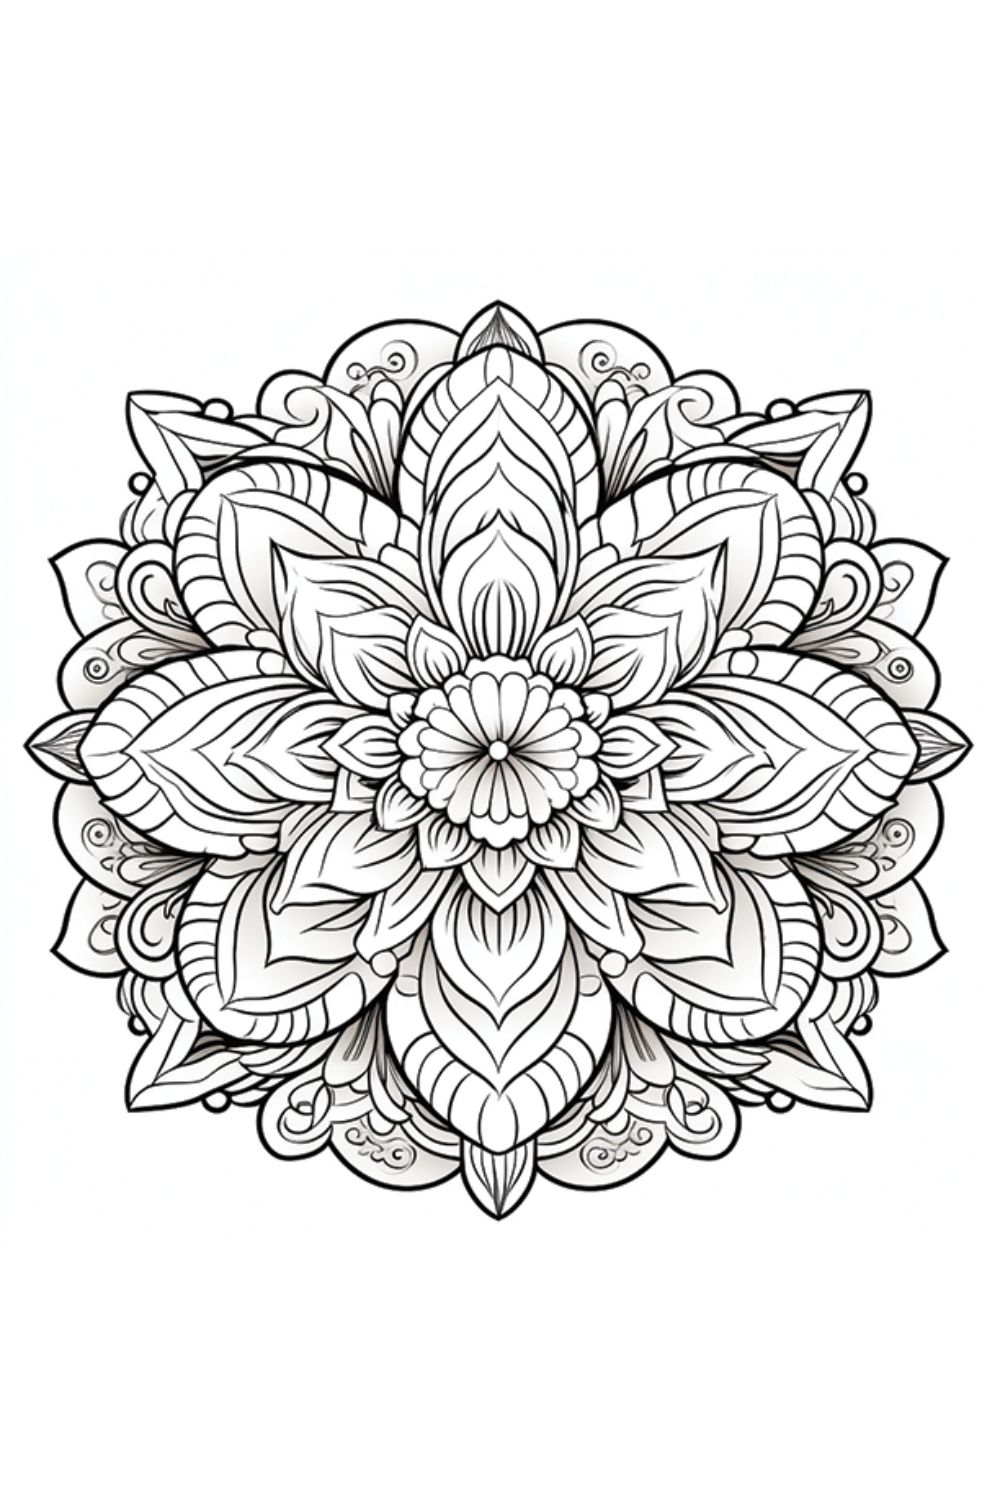 Mandala coloring pages pinterest preview image.